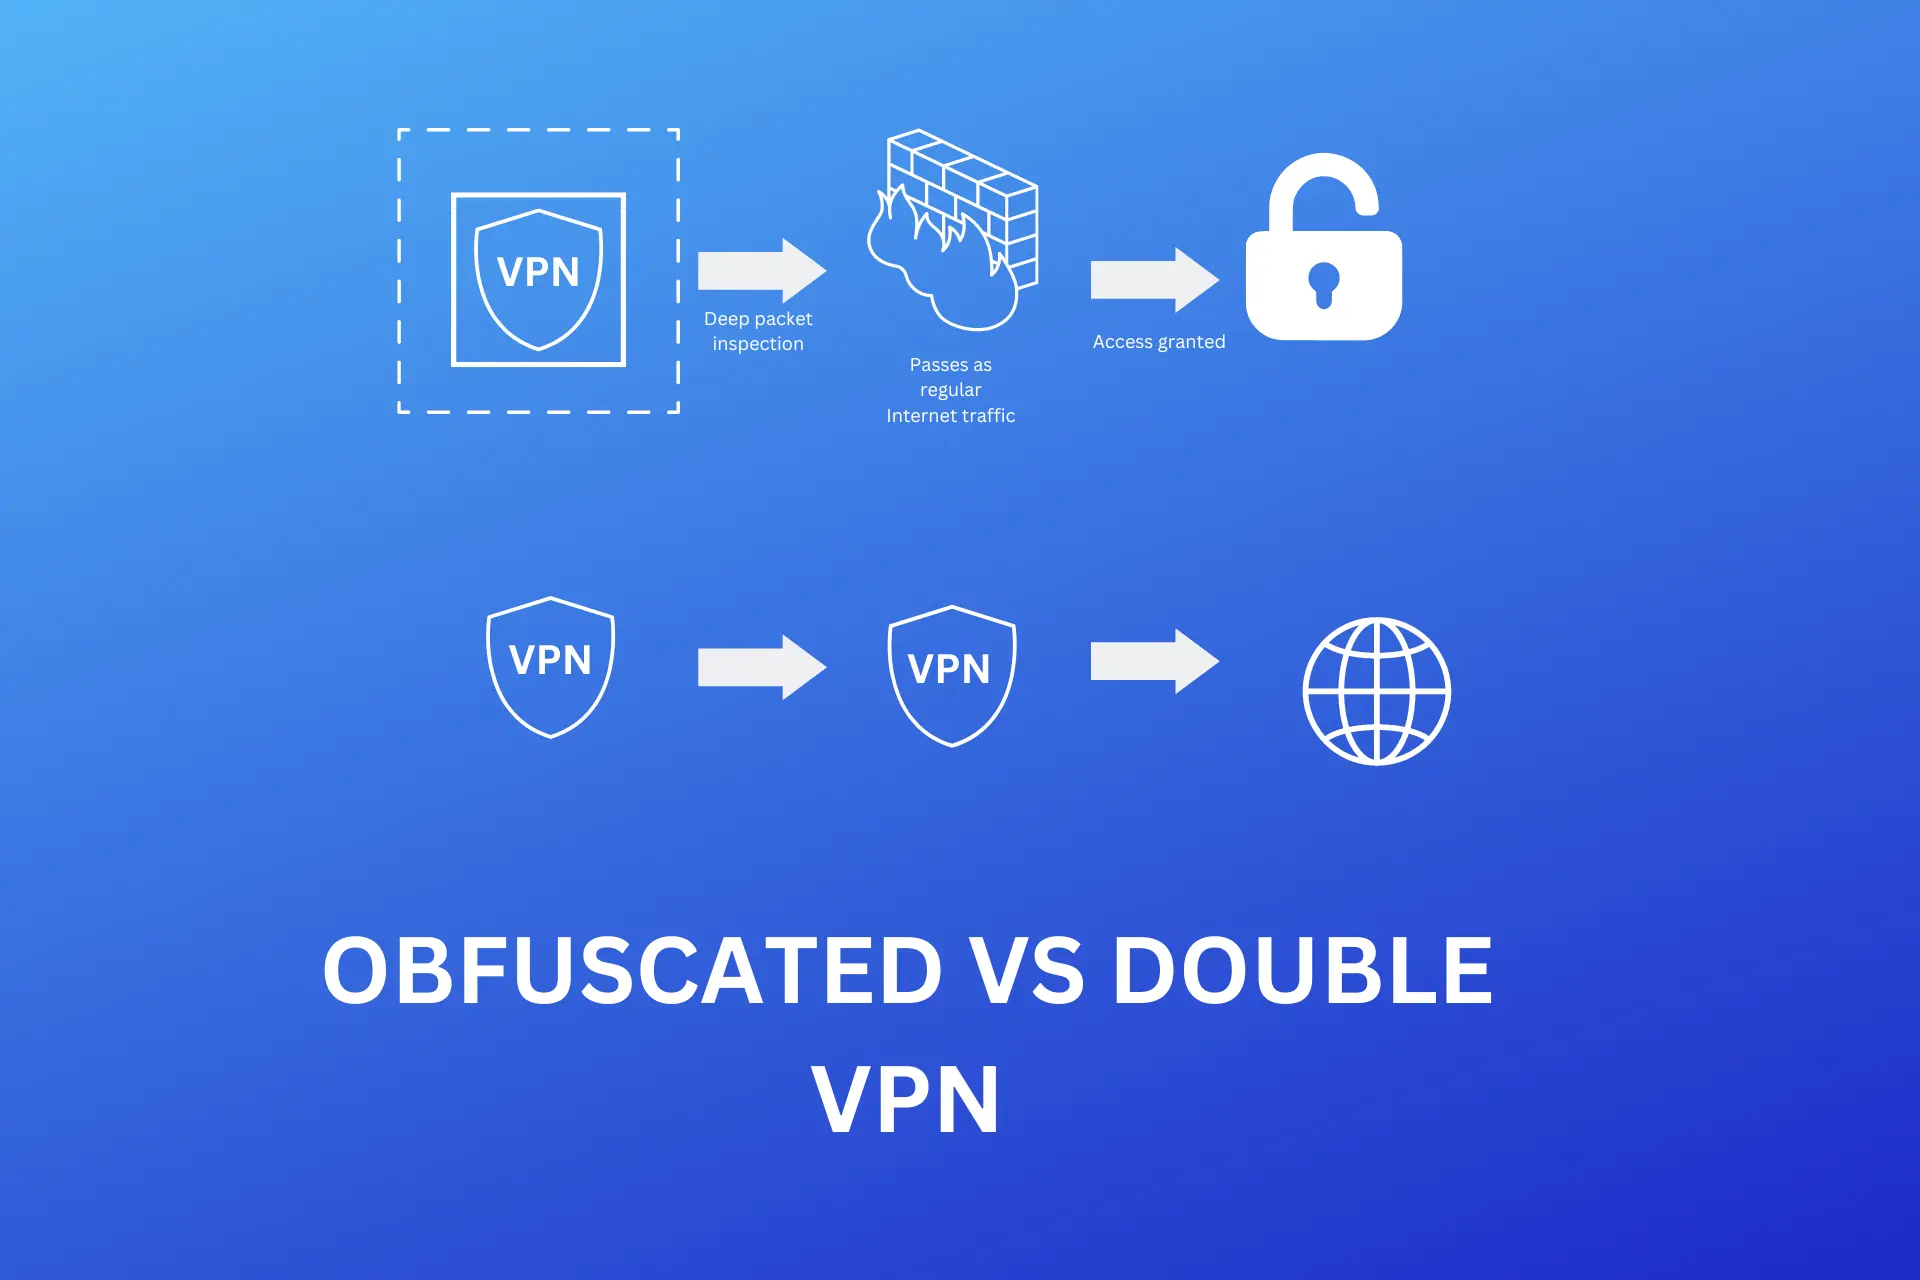 OBFUSCATED VS DOUBLE VPN